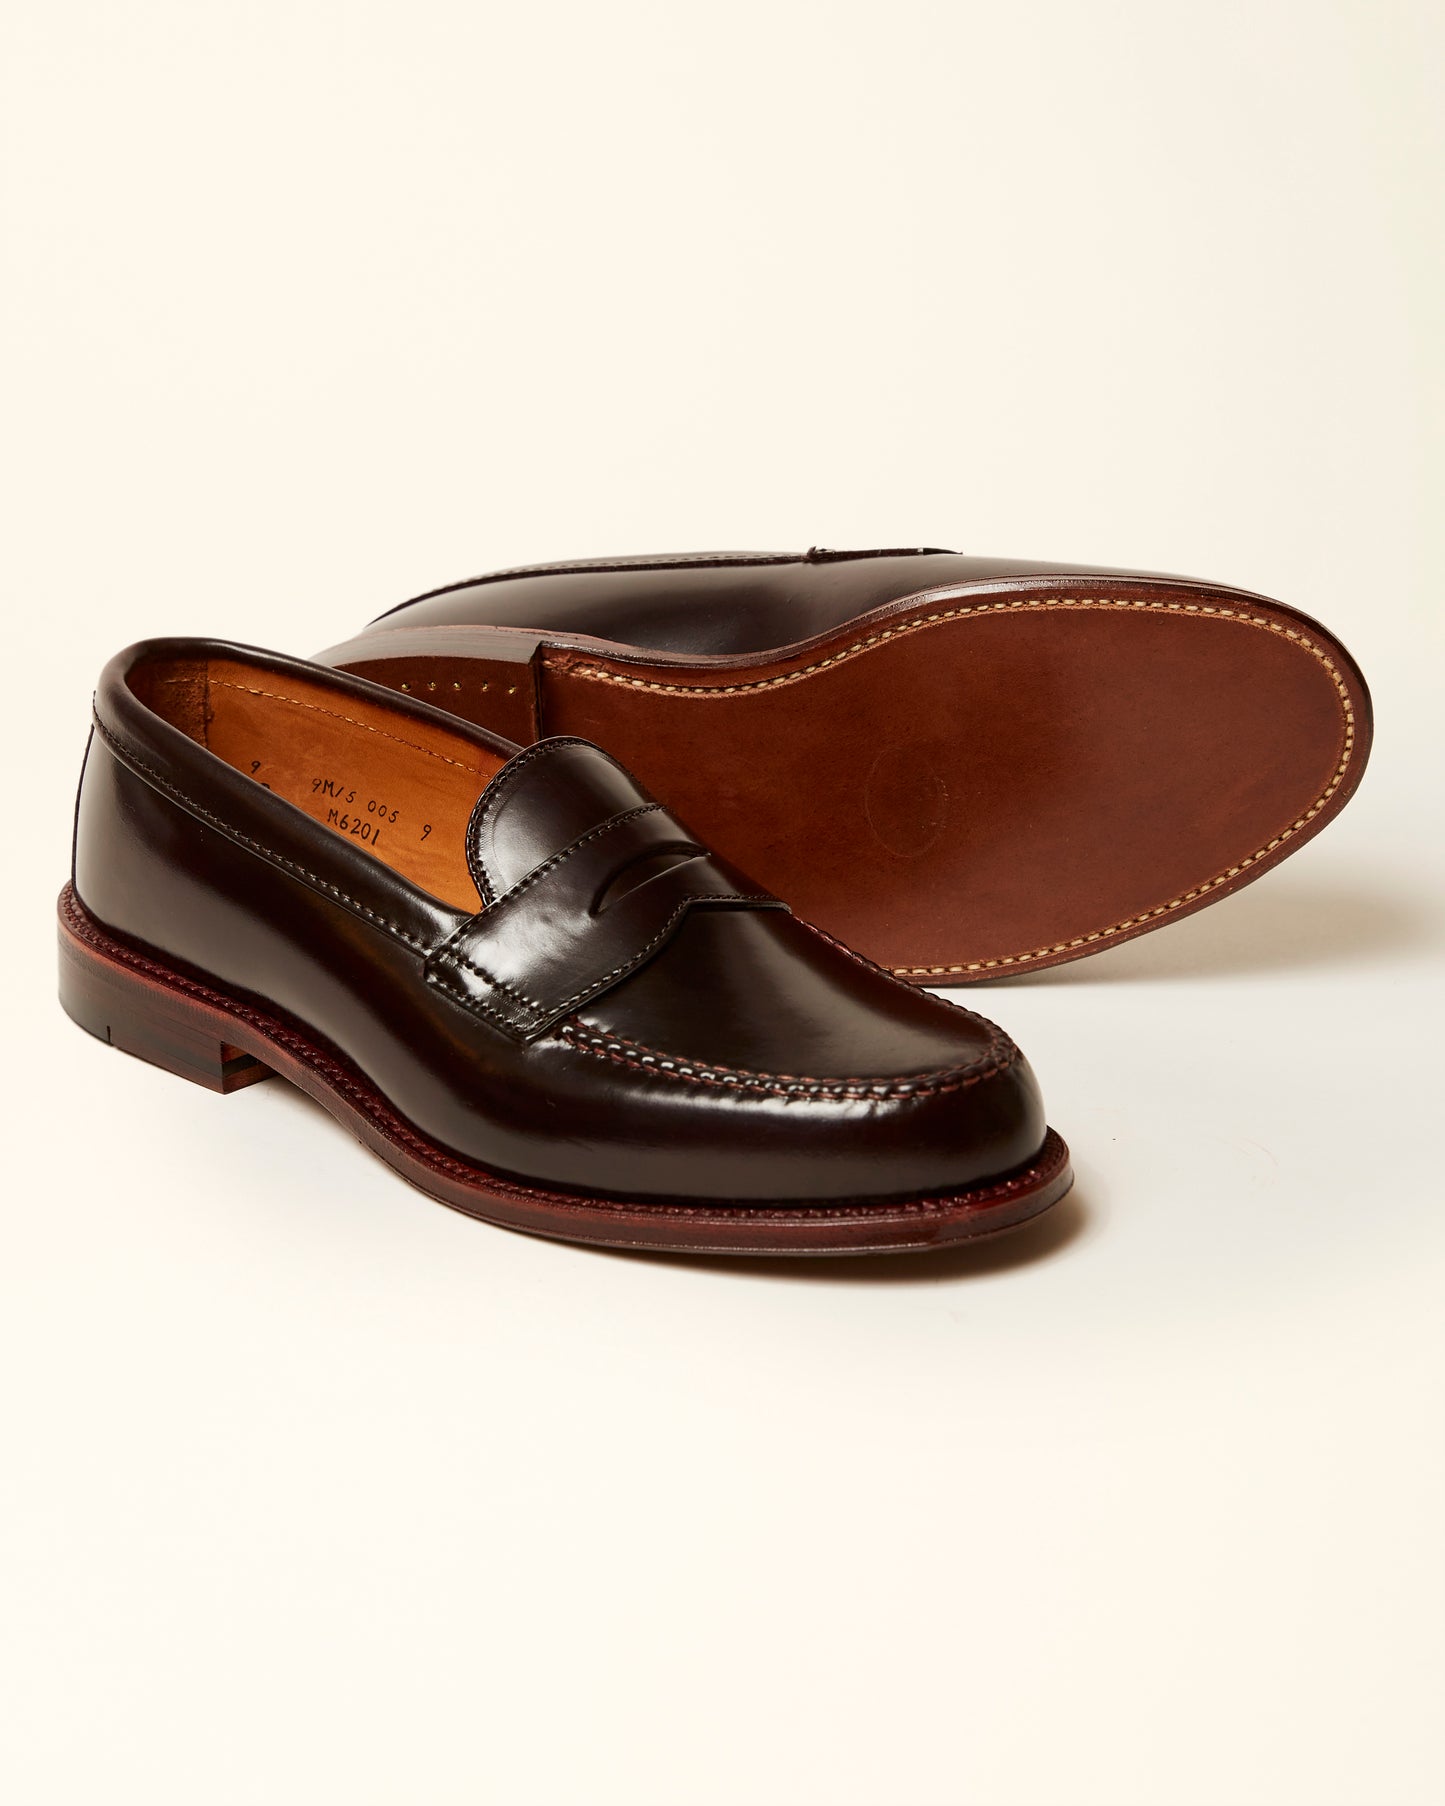 "University Loafer" 986A Color 8 Shell Cordovan LHS (Antique Welt)